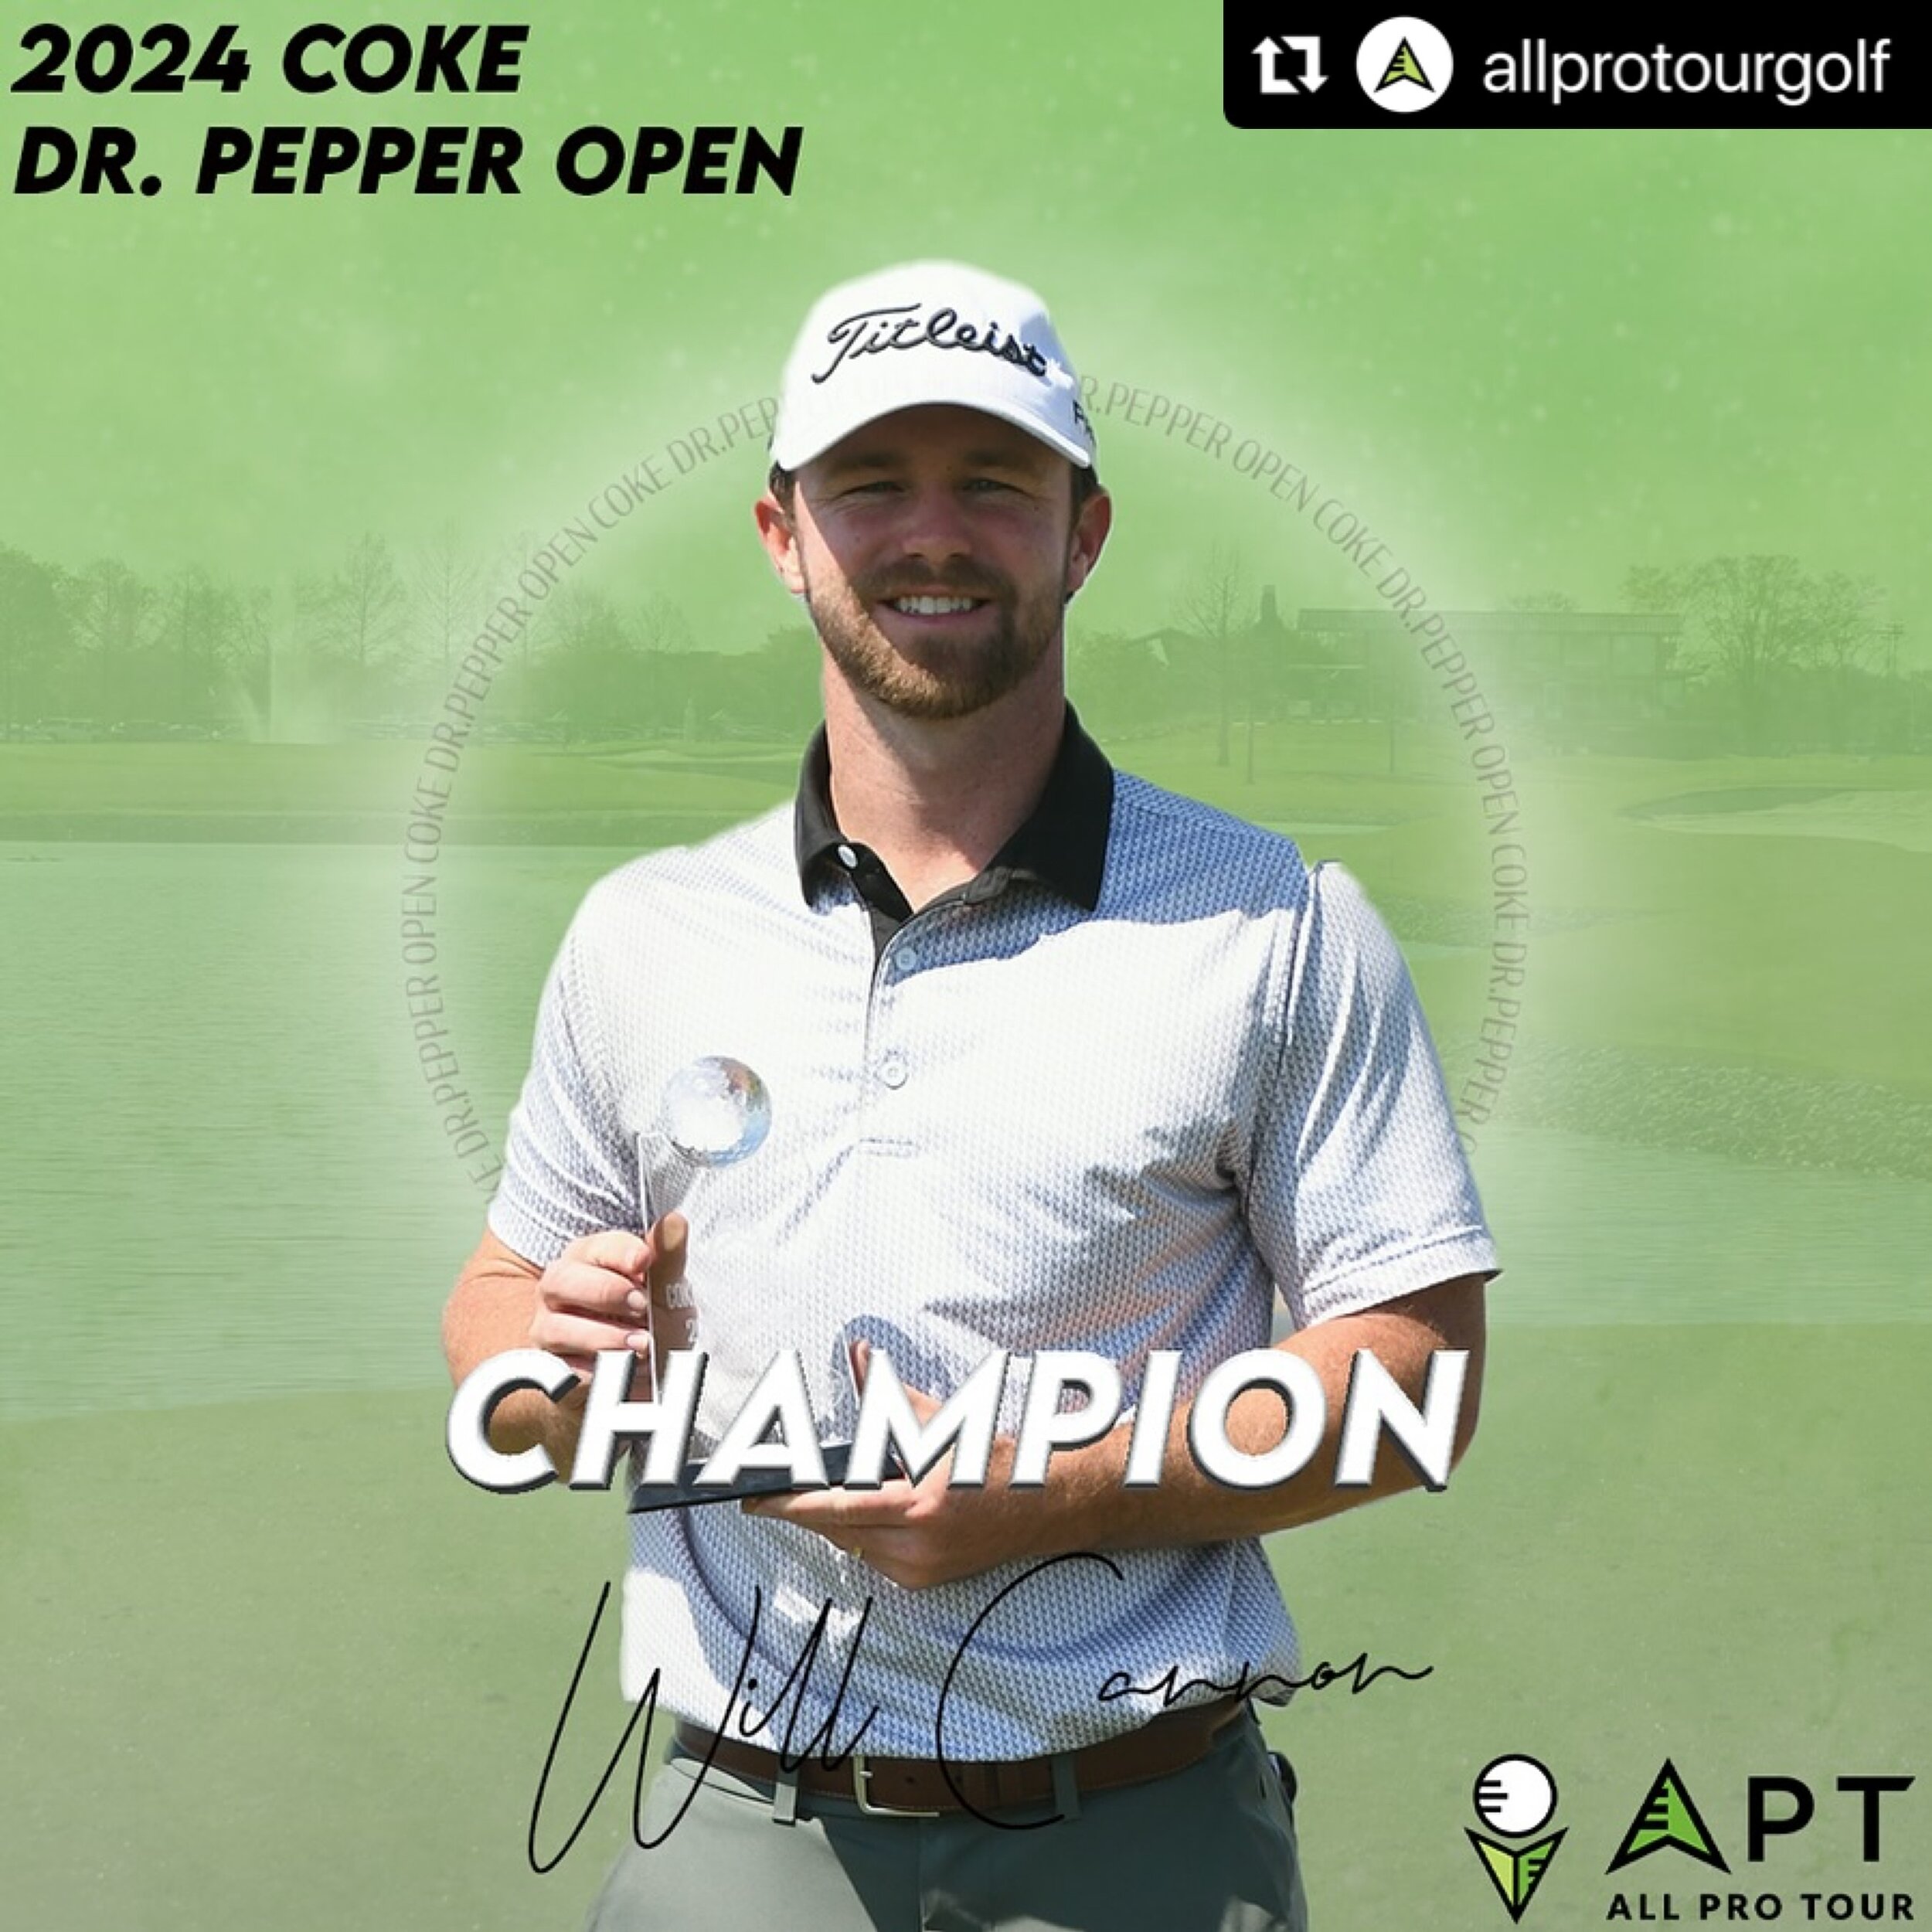 Congratulations to Will Cannon for his victory at the 2024 Coke Dr. Pepper Open! 🏆
・・・
#Repost @allprotourgolf